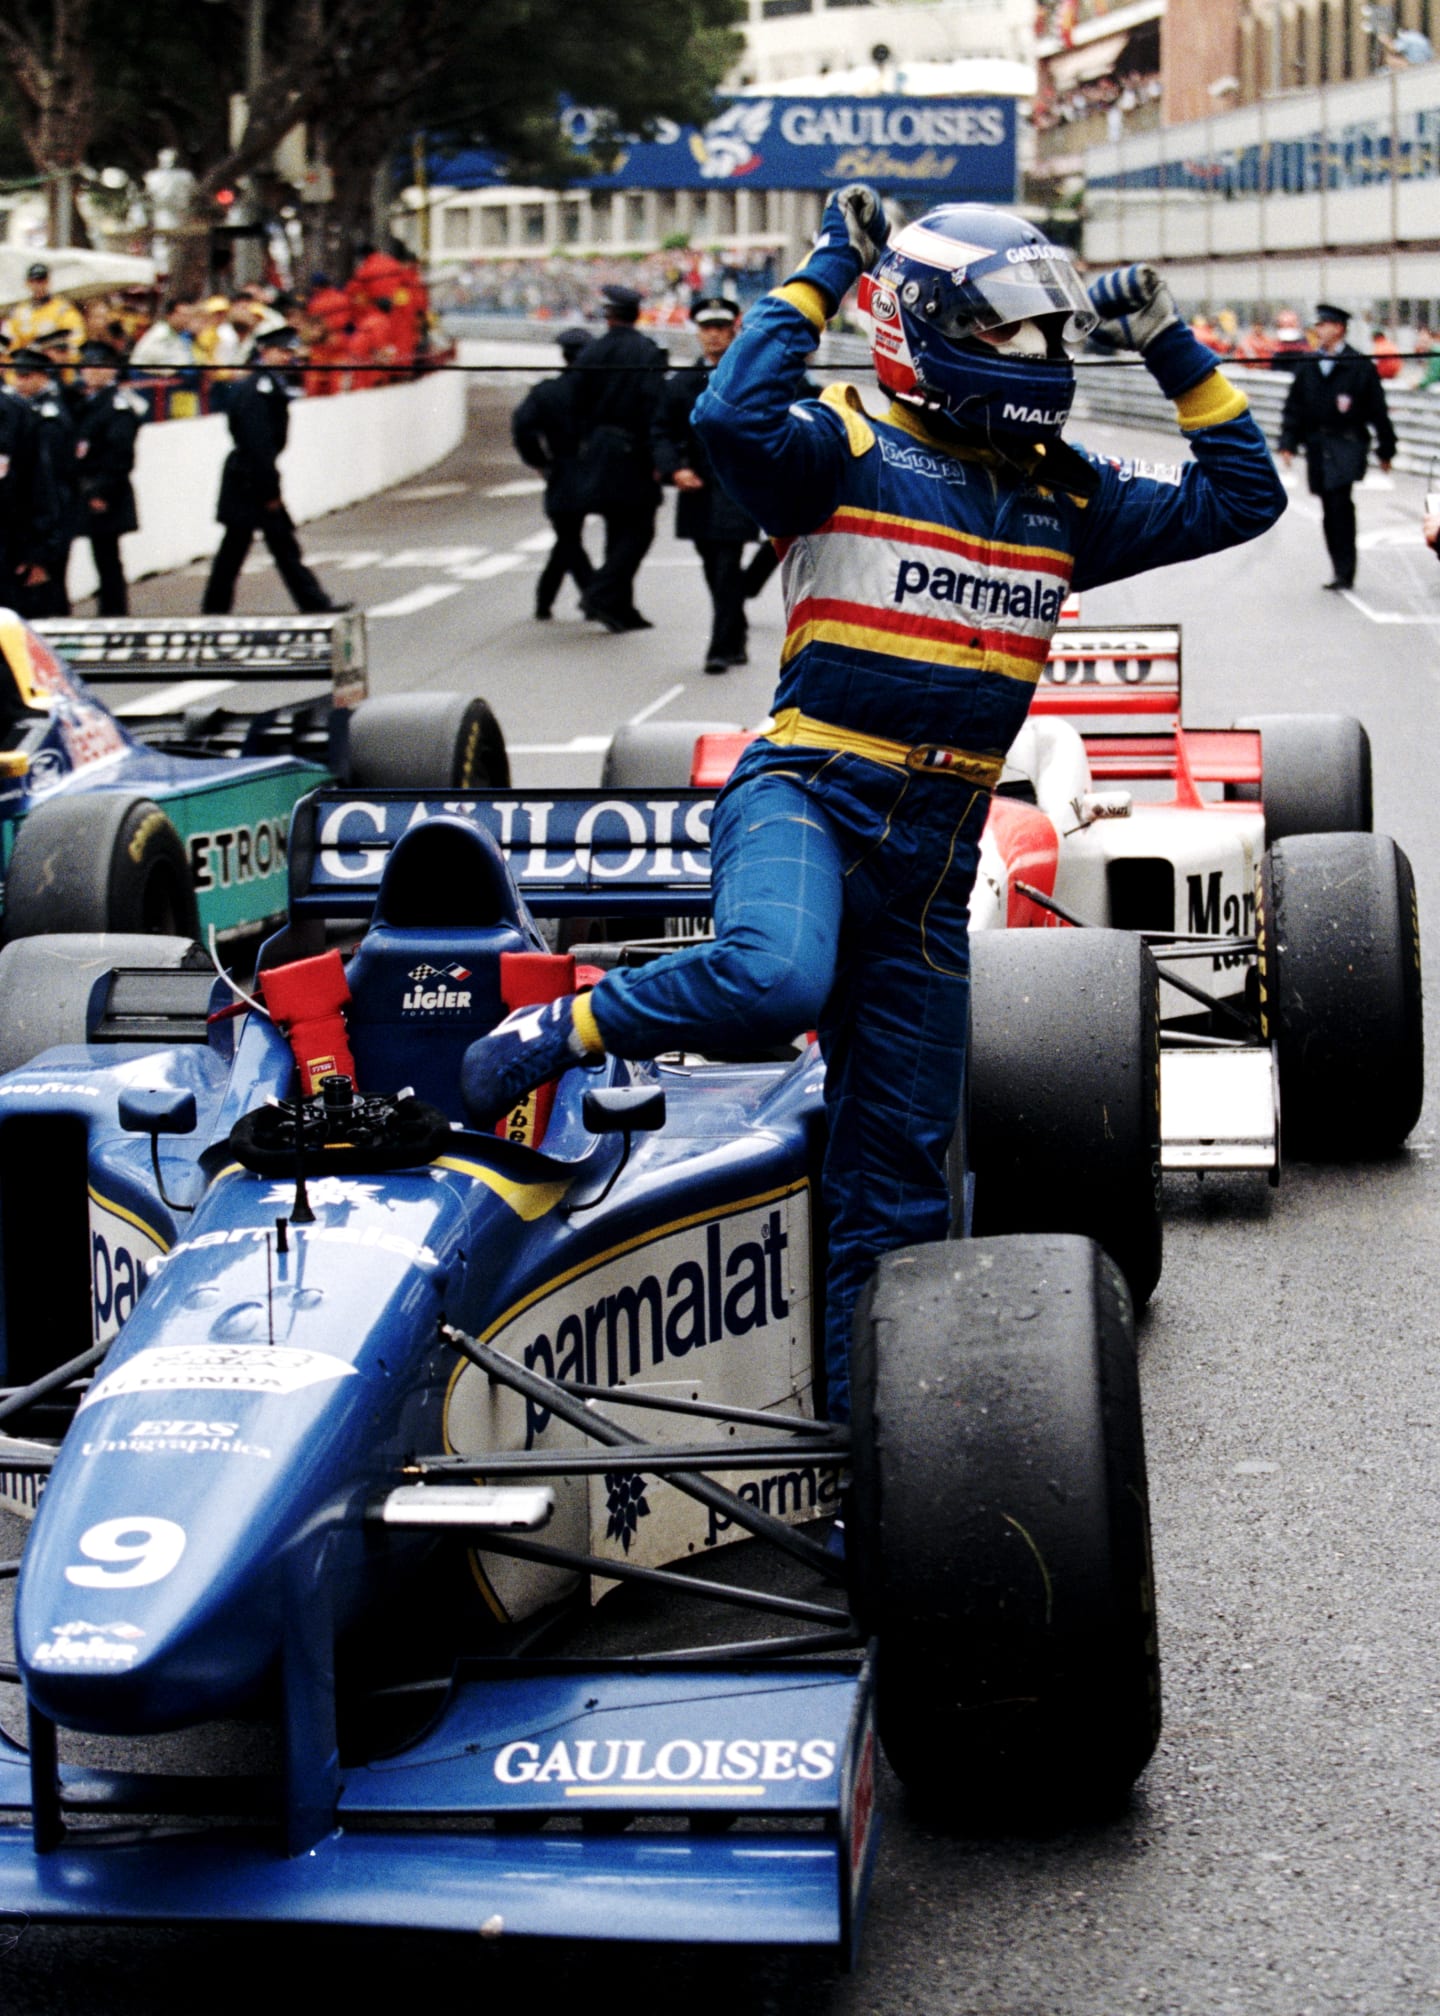 Olivier Panis with arms aloft climbs from his #9 Equipe Ligier Gauloises Blondes Ligier JS43